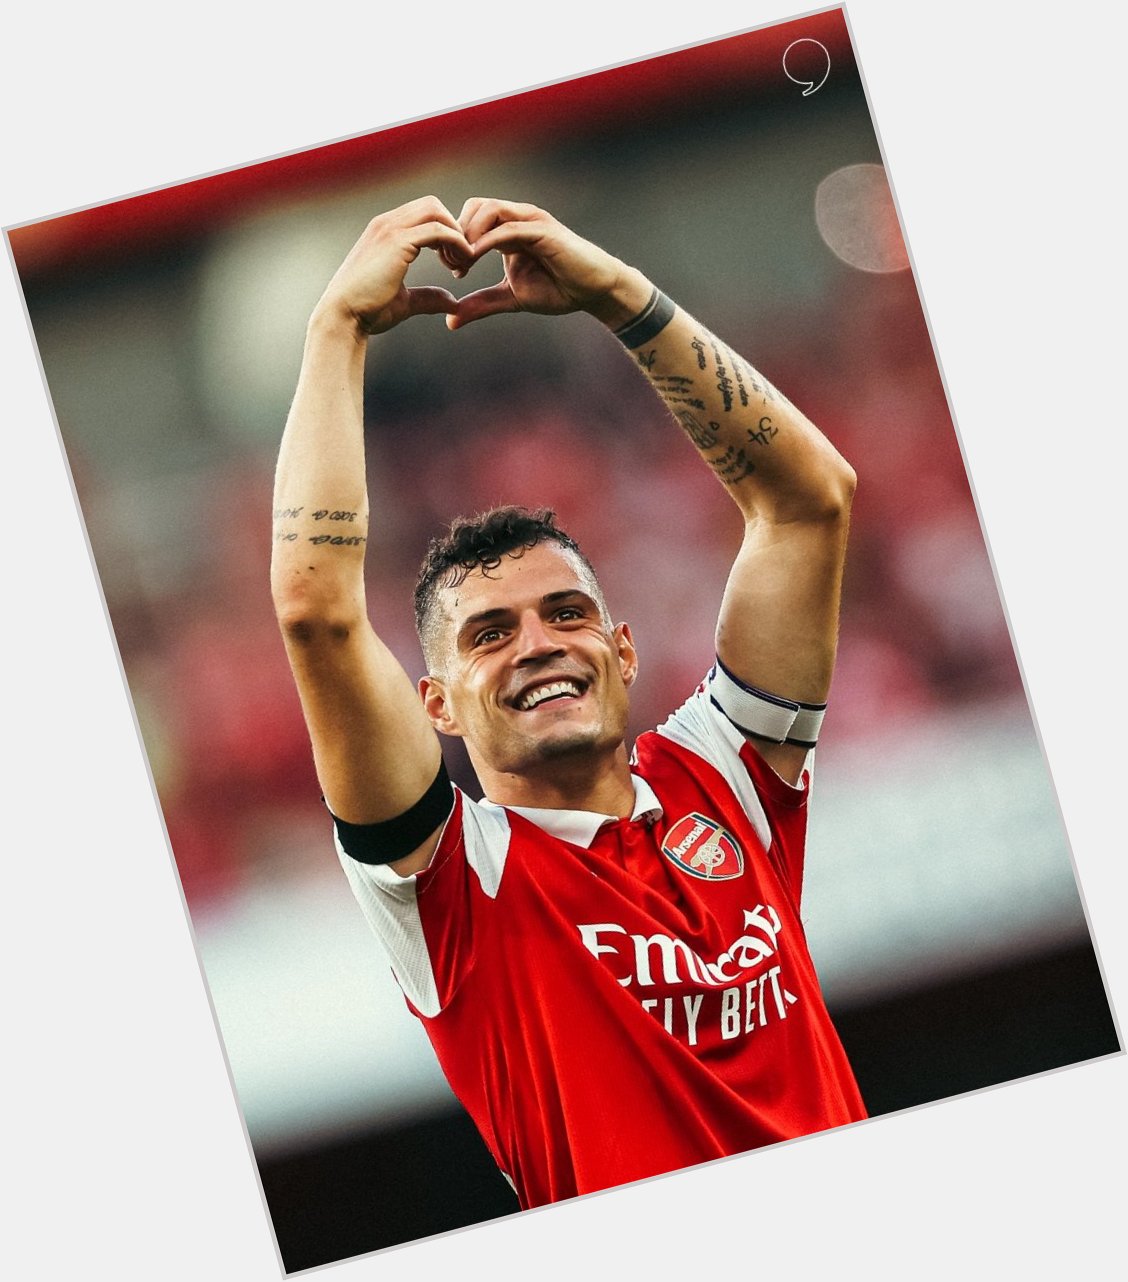 There is only one player who can revive his game, despite having a rough history.Happy birthday Granit Xhaka   